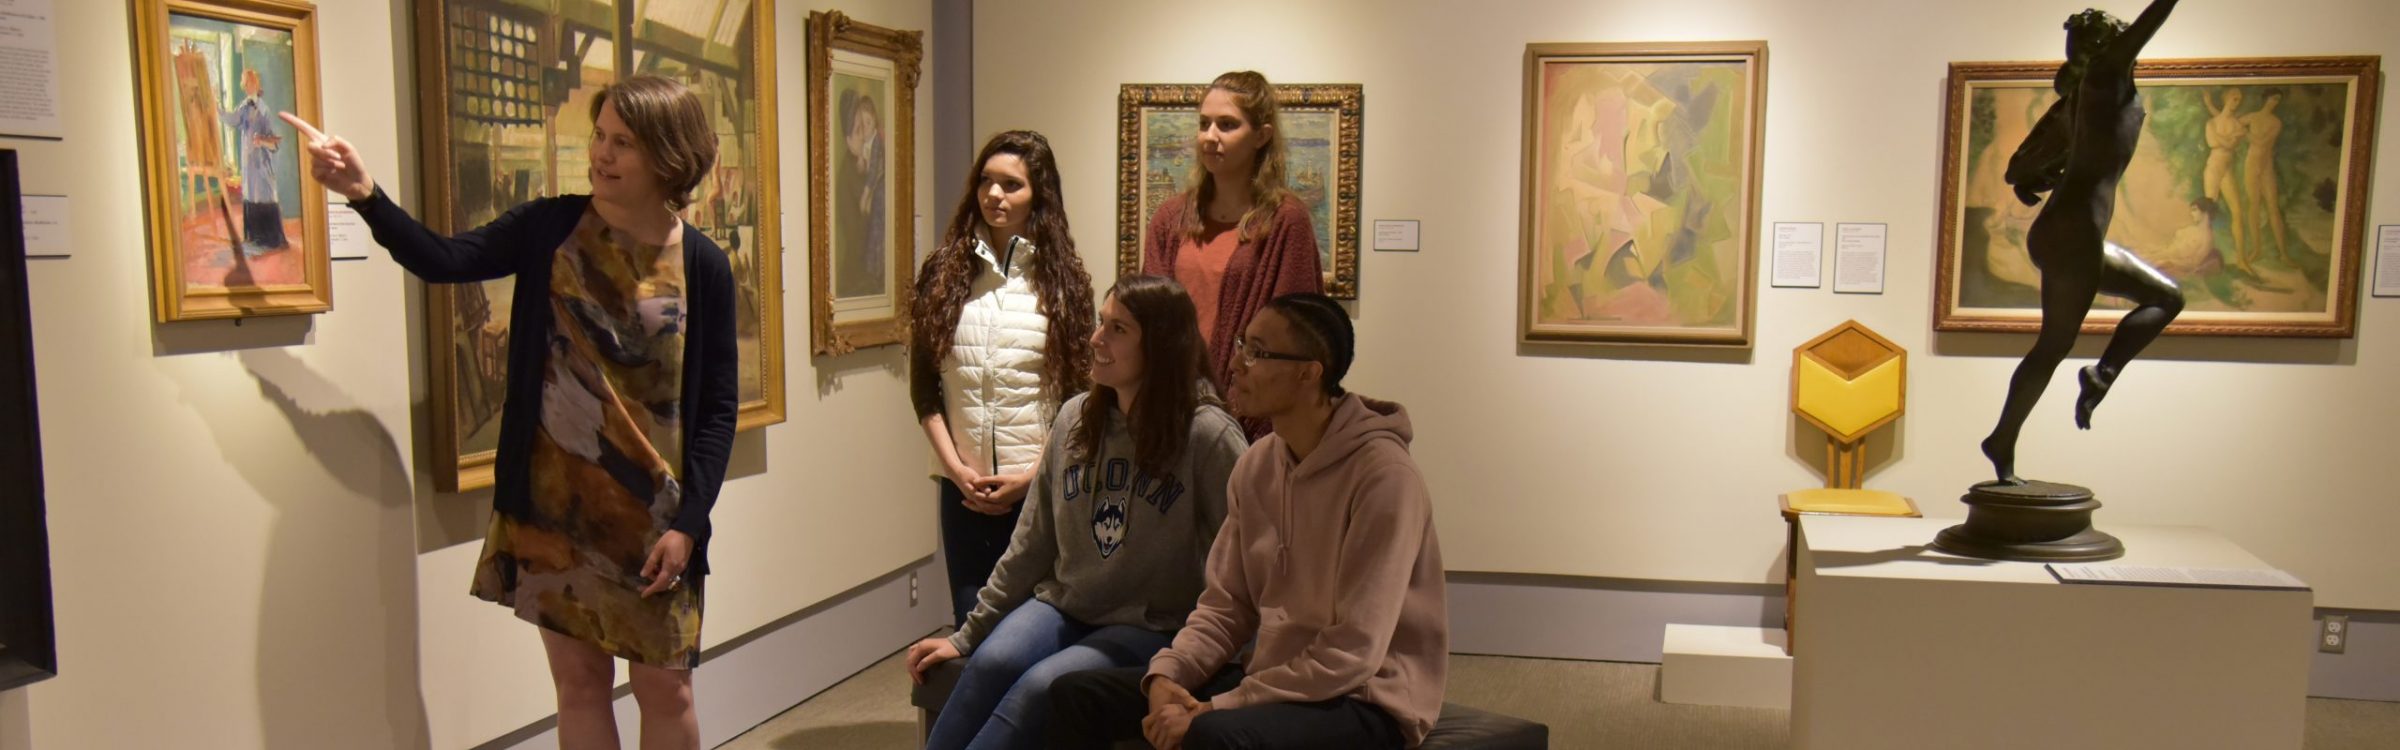 Image of a group of students looking at paintings.